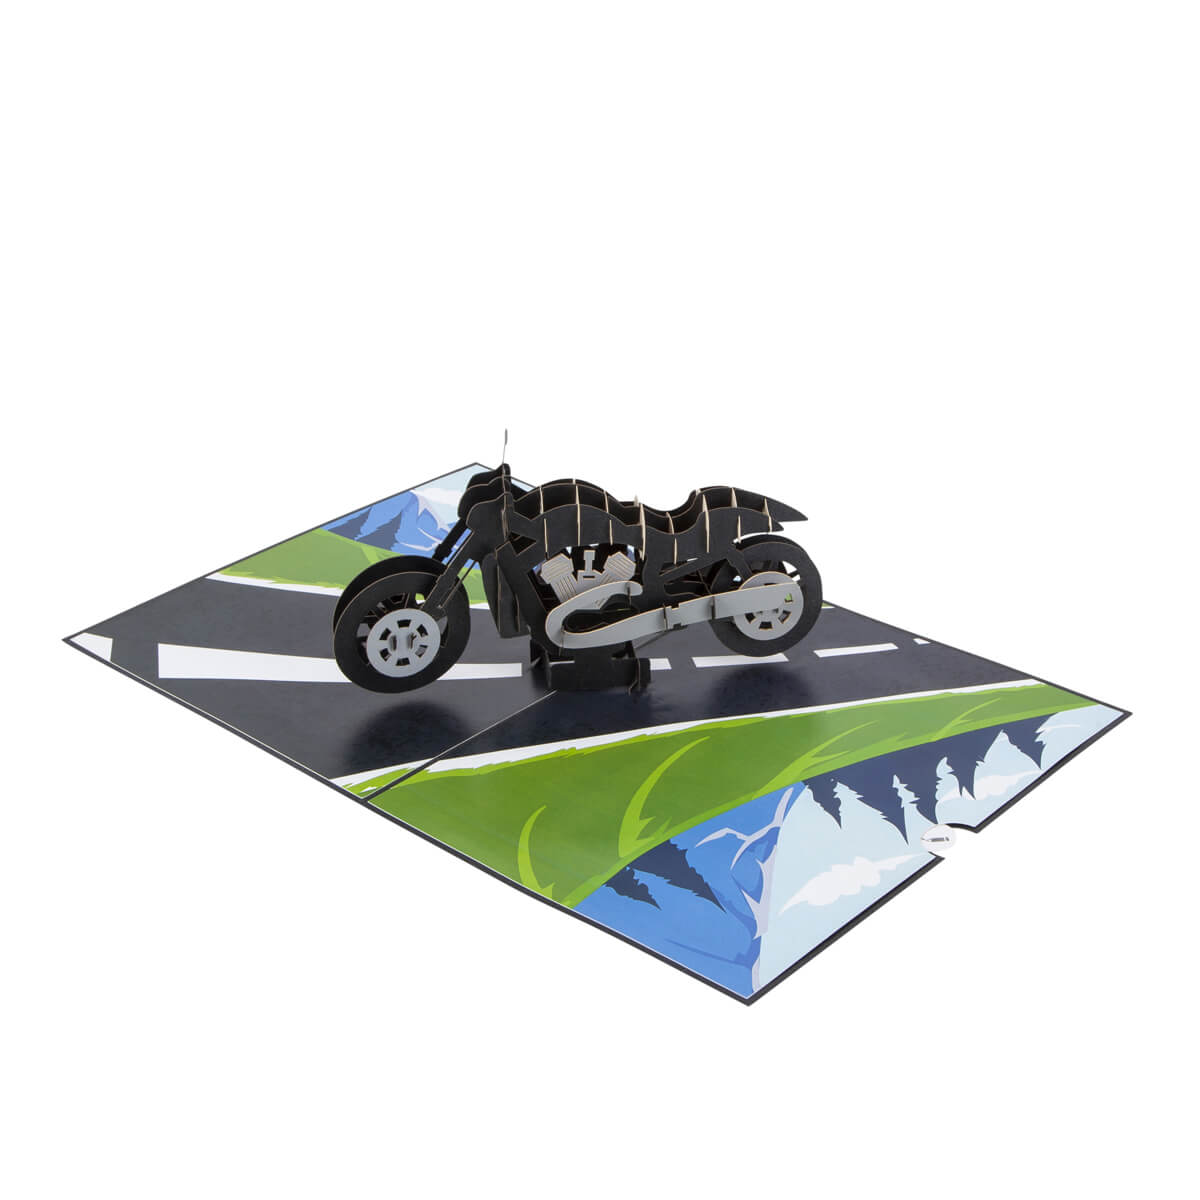 Motorbike Pop-Up Any Occasion Greeting Card Blank Inside